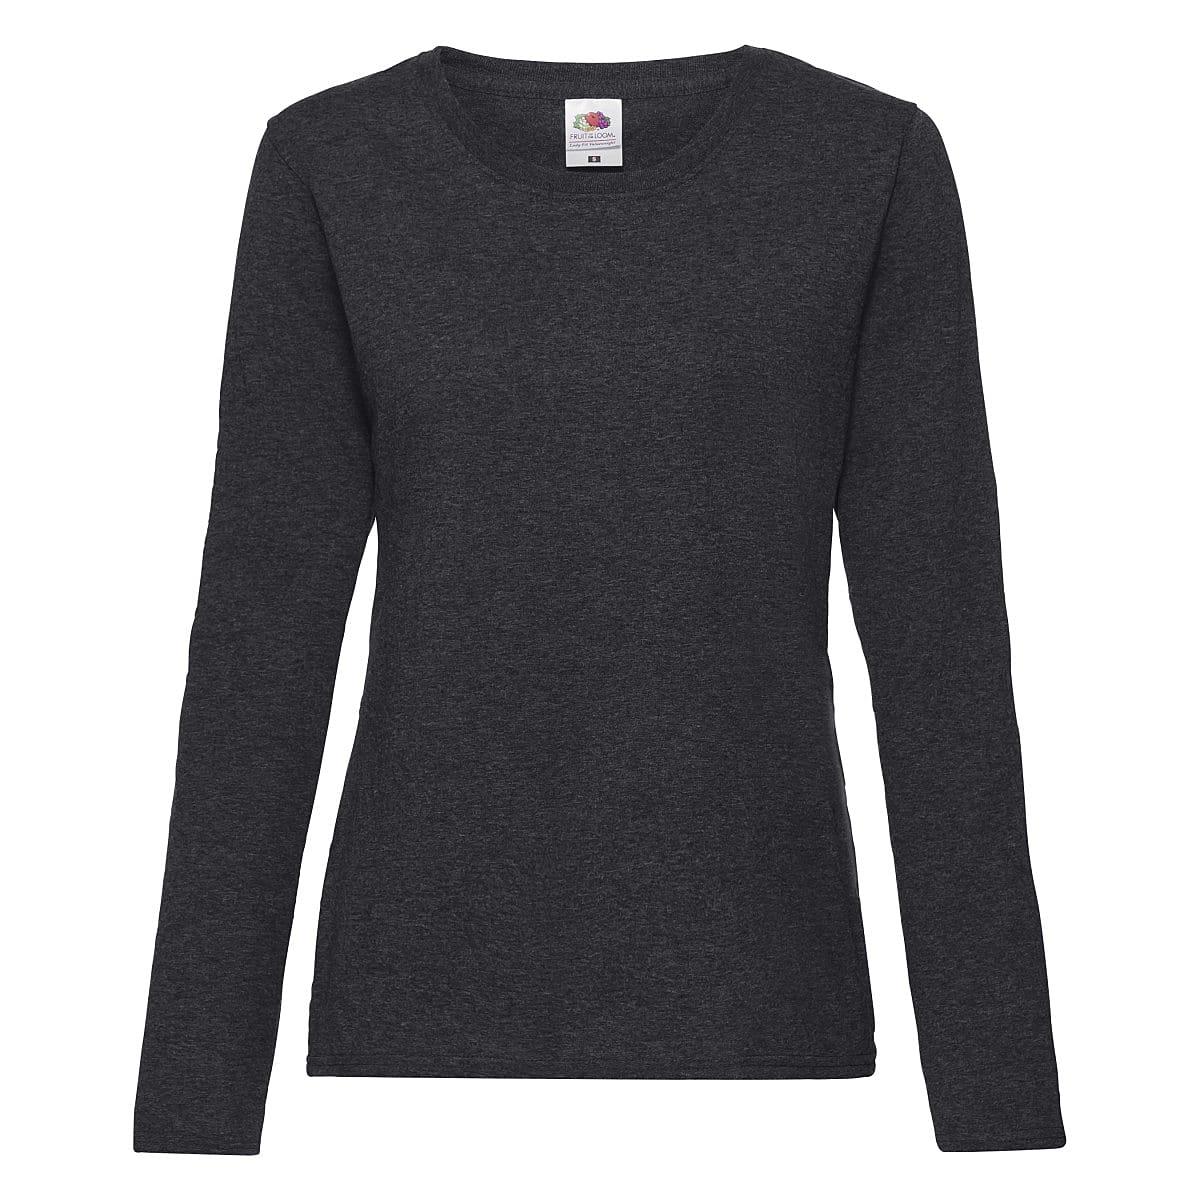 Fruit Of The Loom Lady-Fit Valueweight Long-Sleeve T-Shirt in Dark Heather (Product Code: 61404)